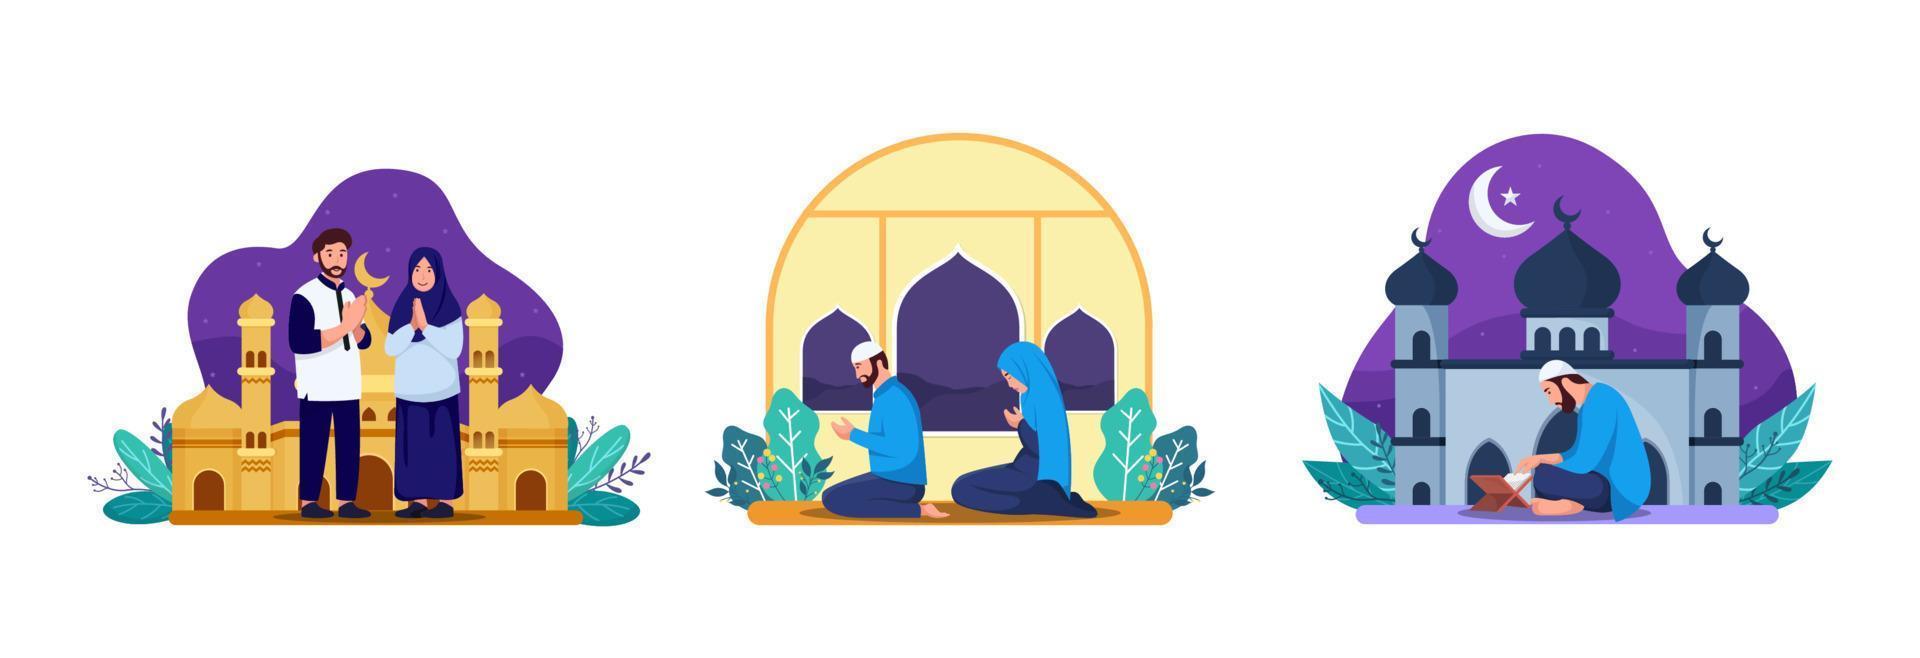 Ramadan Fasting or Iftar Party Set Concept vector